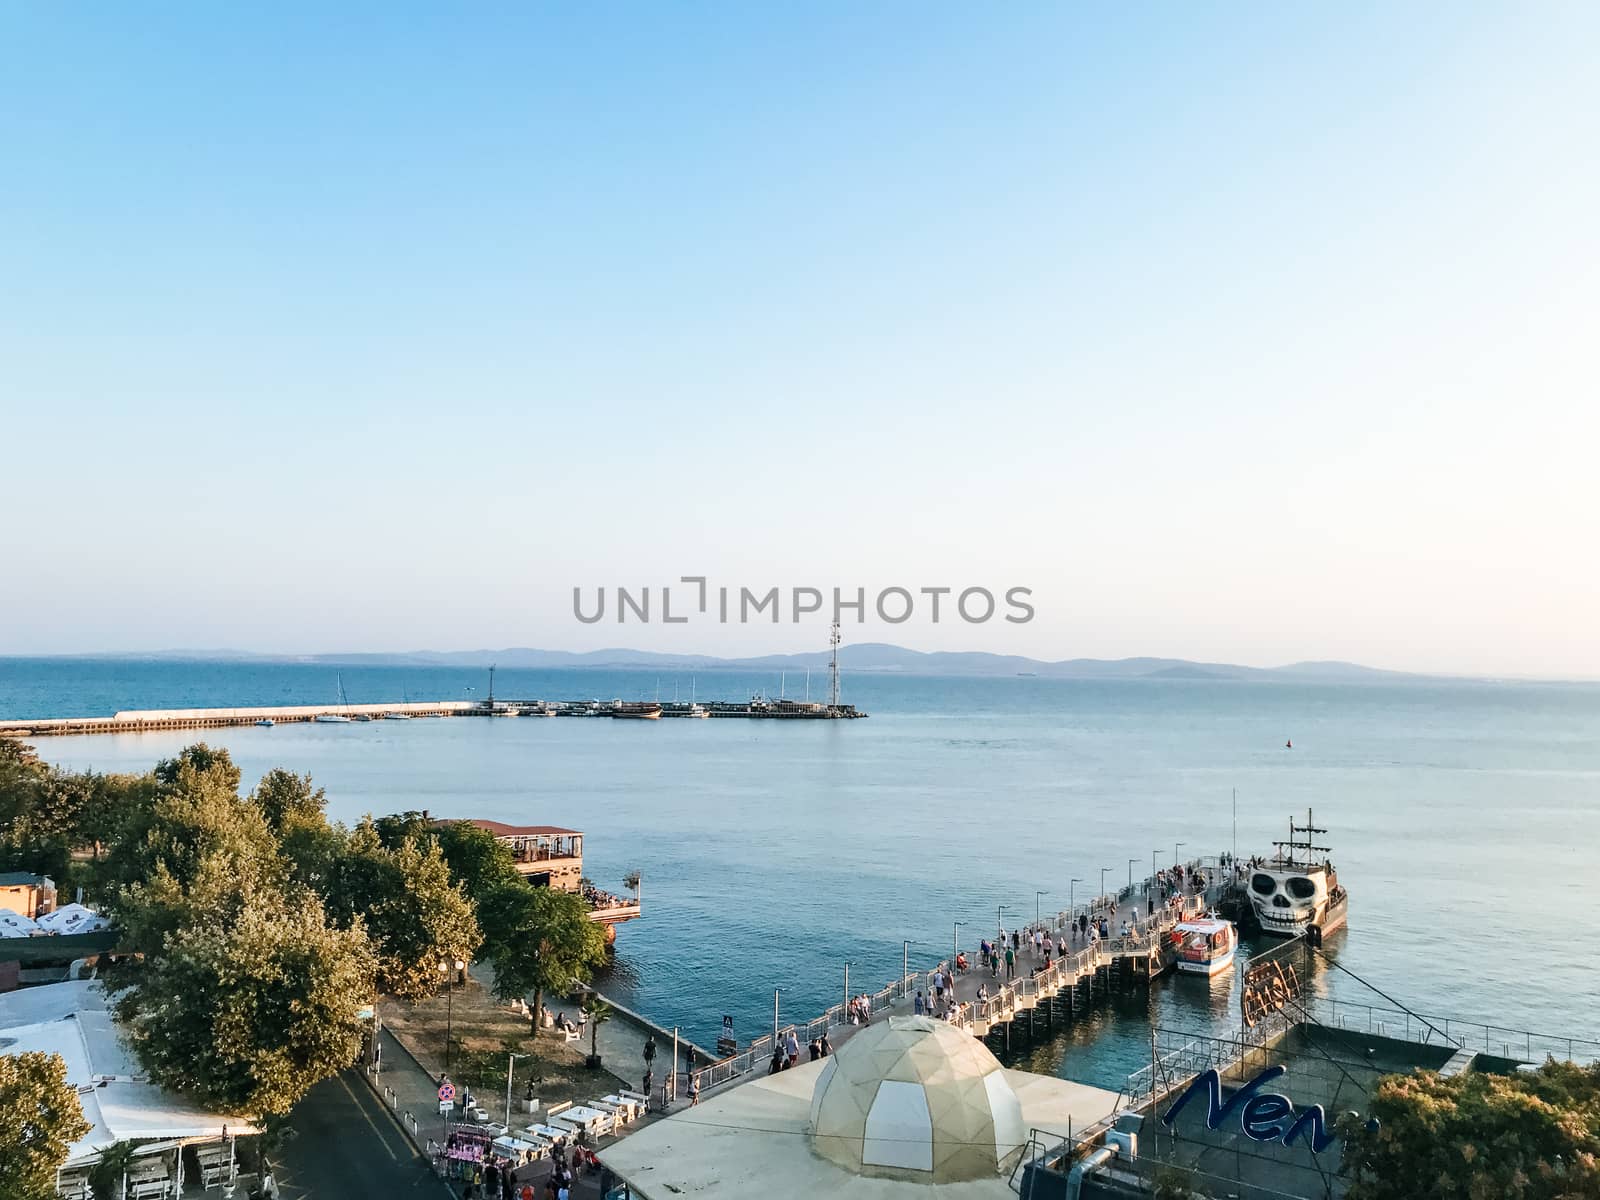 Pomorie, Bulgaria - September 03, 2019: Pomorie Is A Town And Seaside Resort In Southeastern Bulgaria, Located On A Narrow Rocky Peninsula In Burgas Bay On The Southern Bulgarian Black Sea Coast.